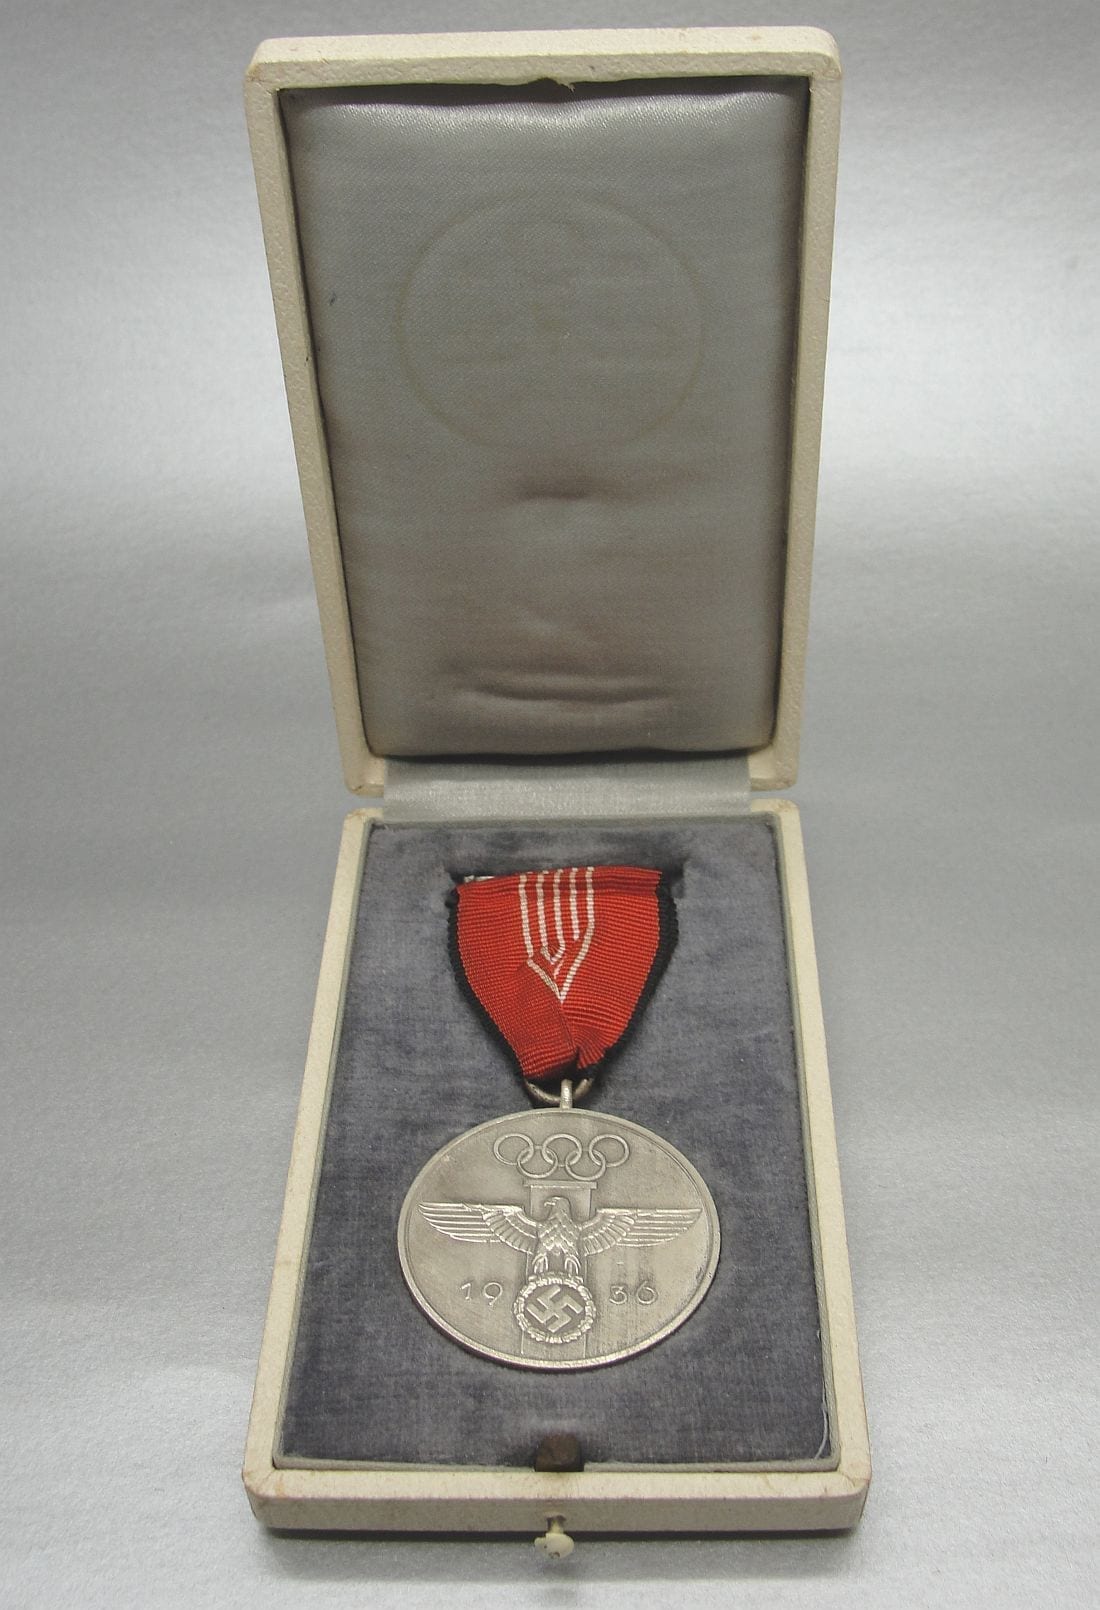 Cased 1936 Olympic Service Medal